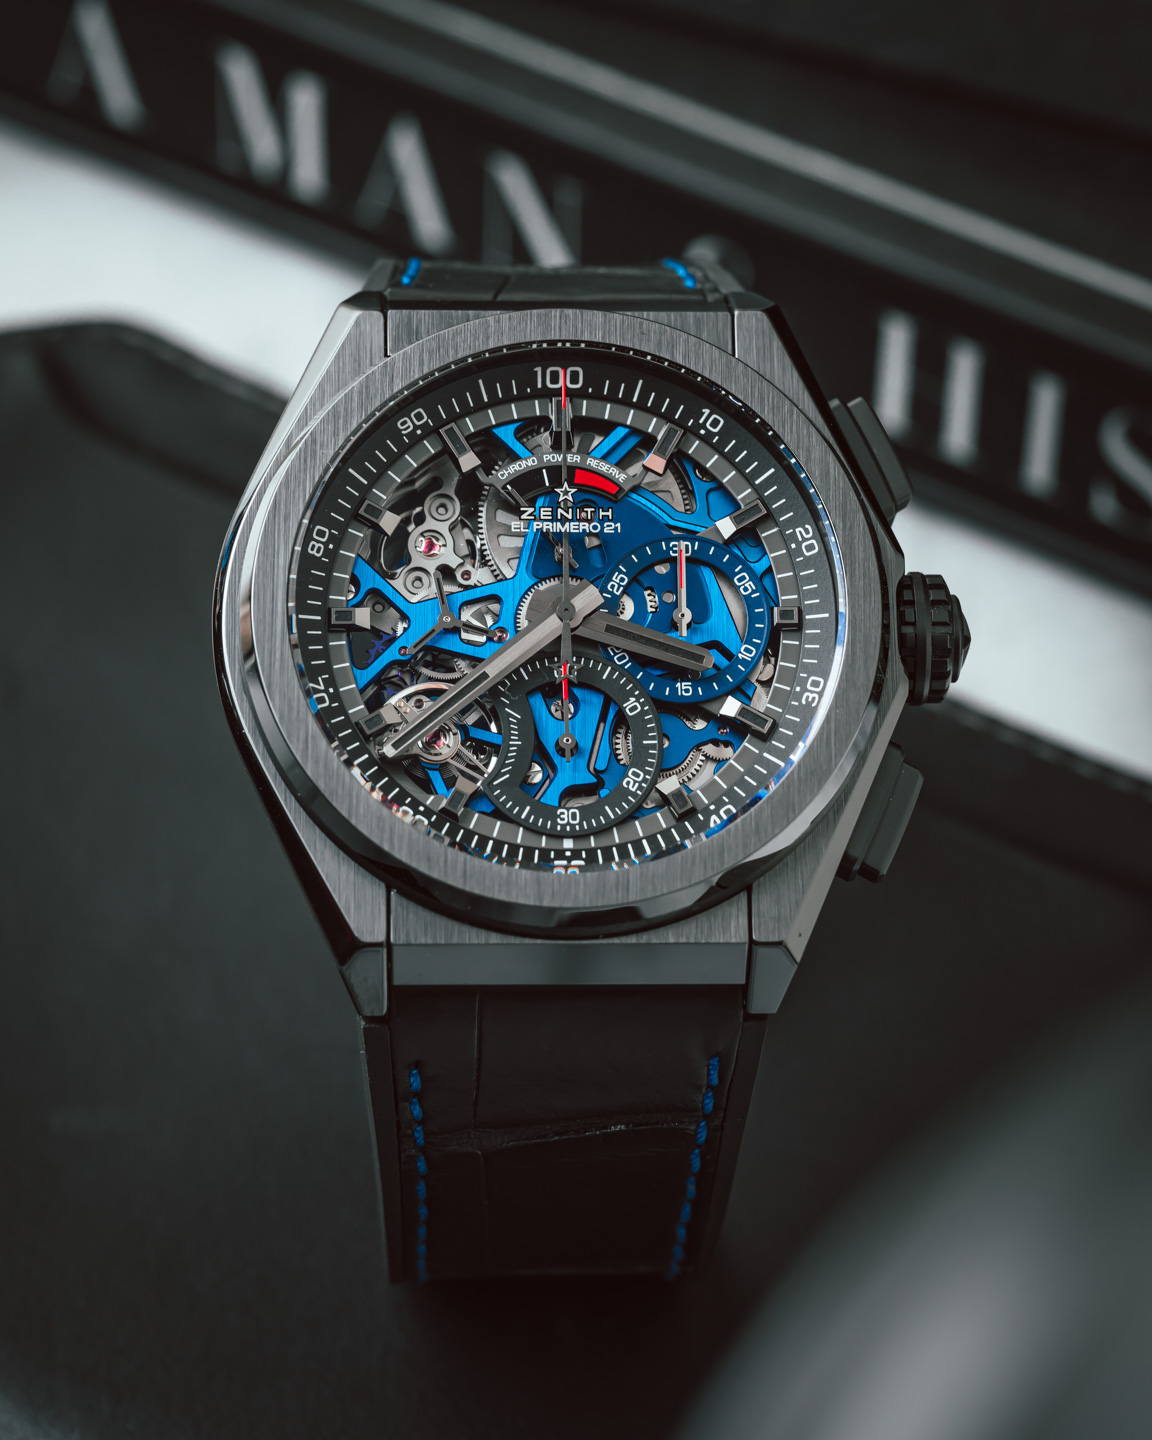 Hands-On - The New Zenith Defy Skyline Boutique Edition